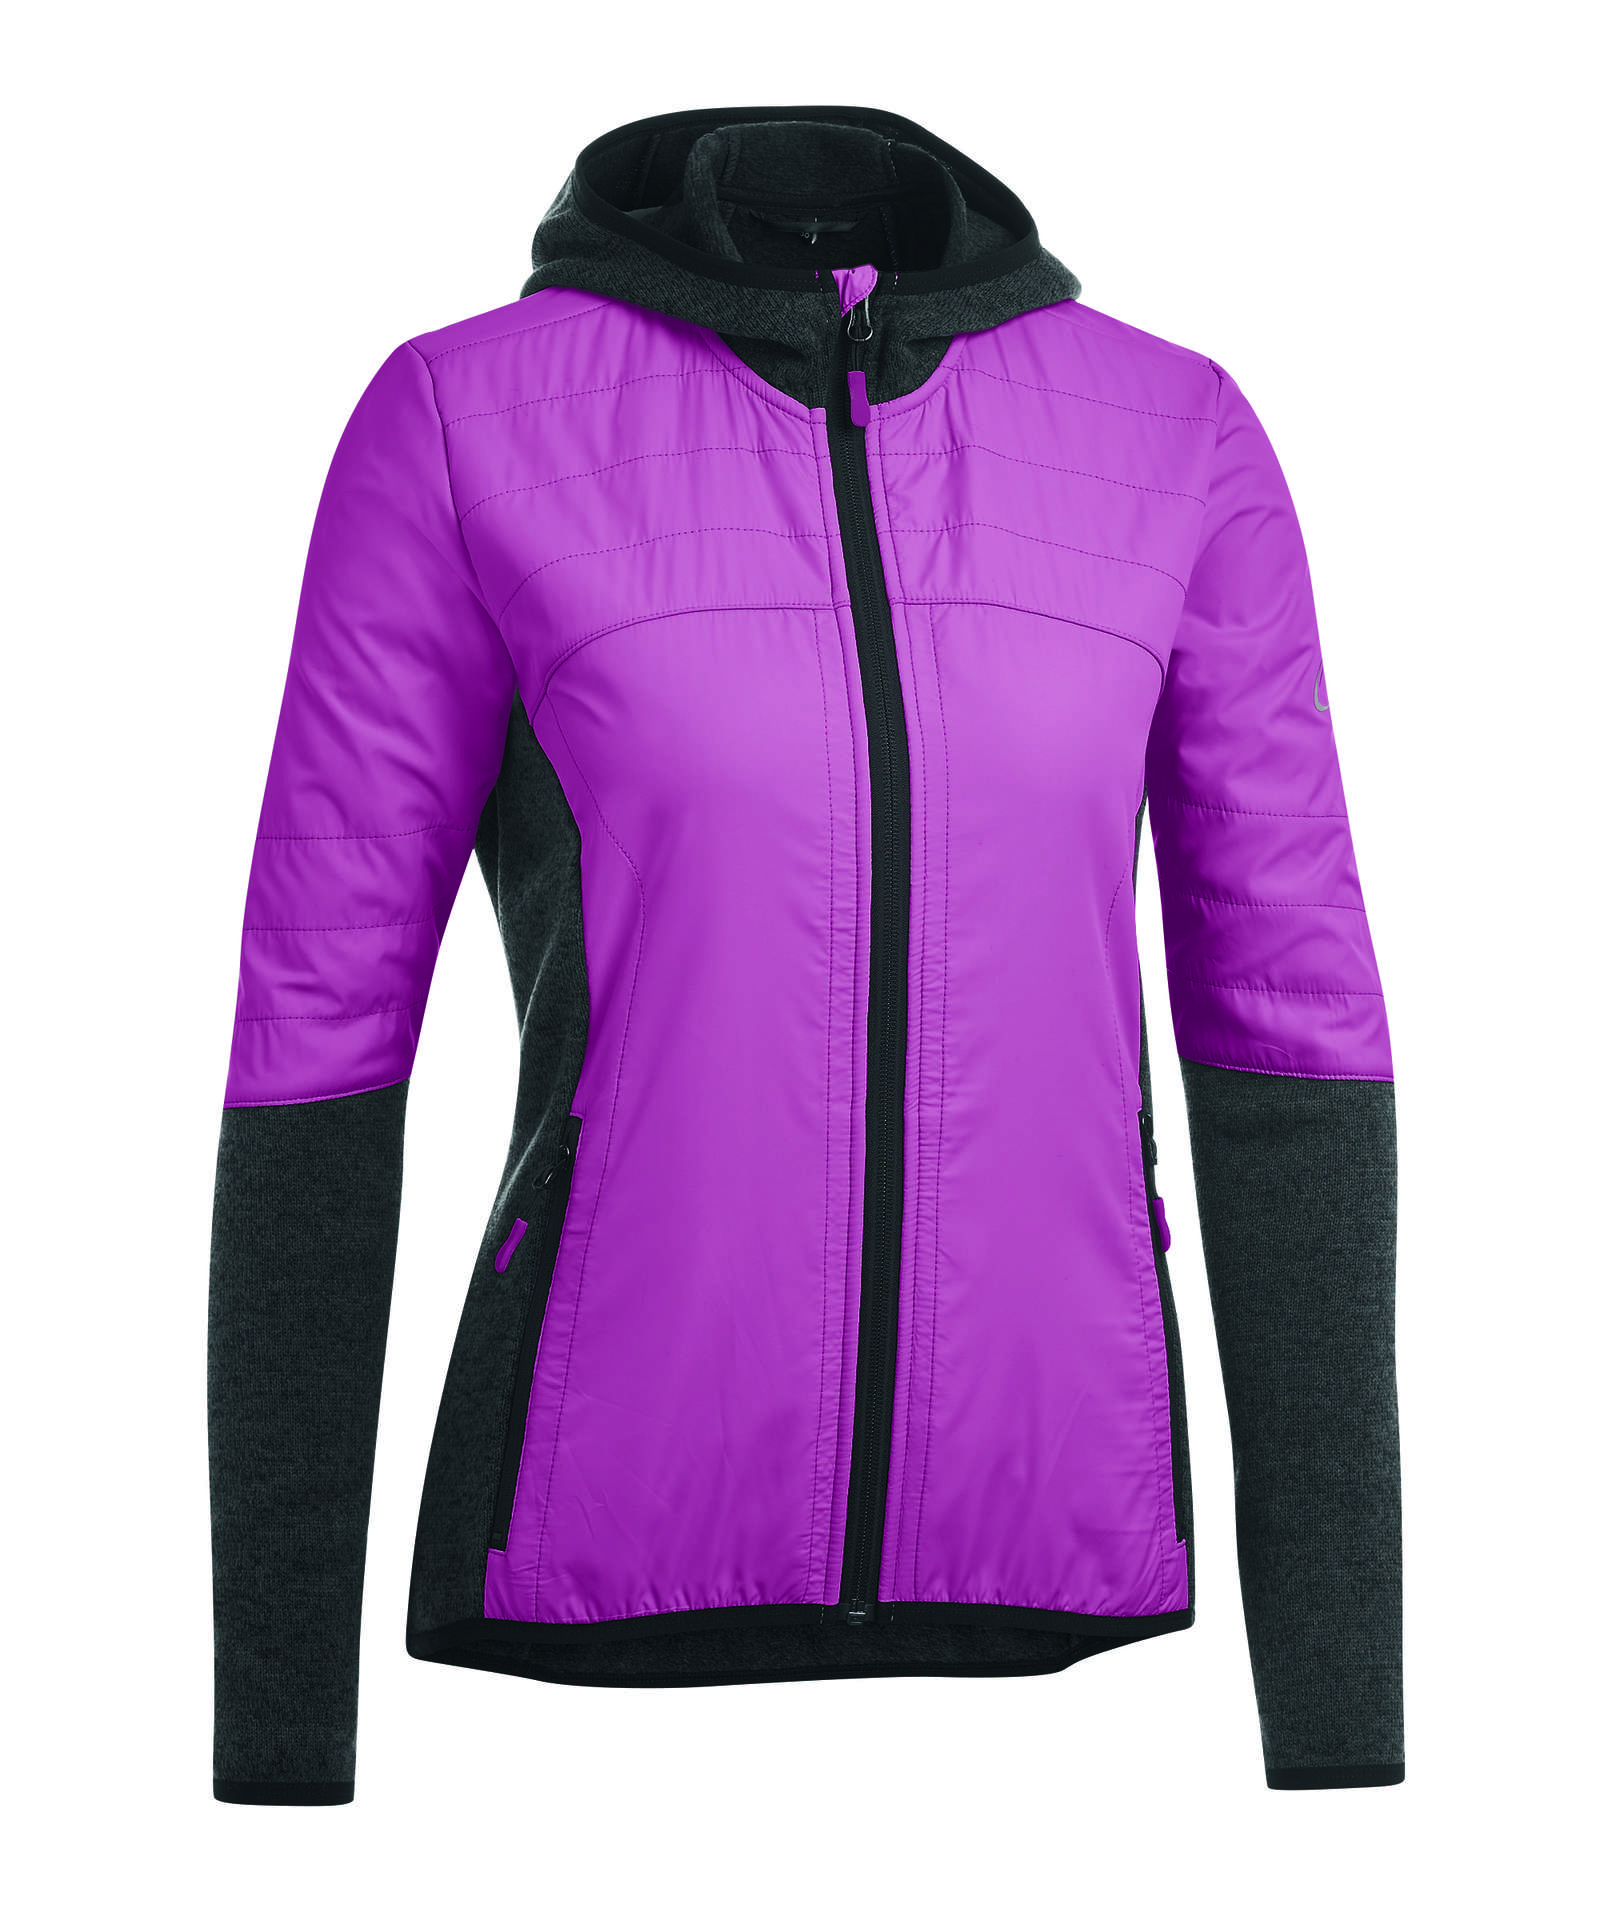 Gonso Perry Thermo Active Fietsjack Paars/Zwart Dames